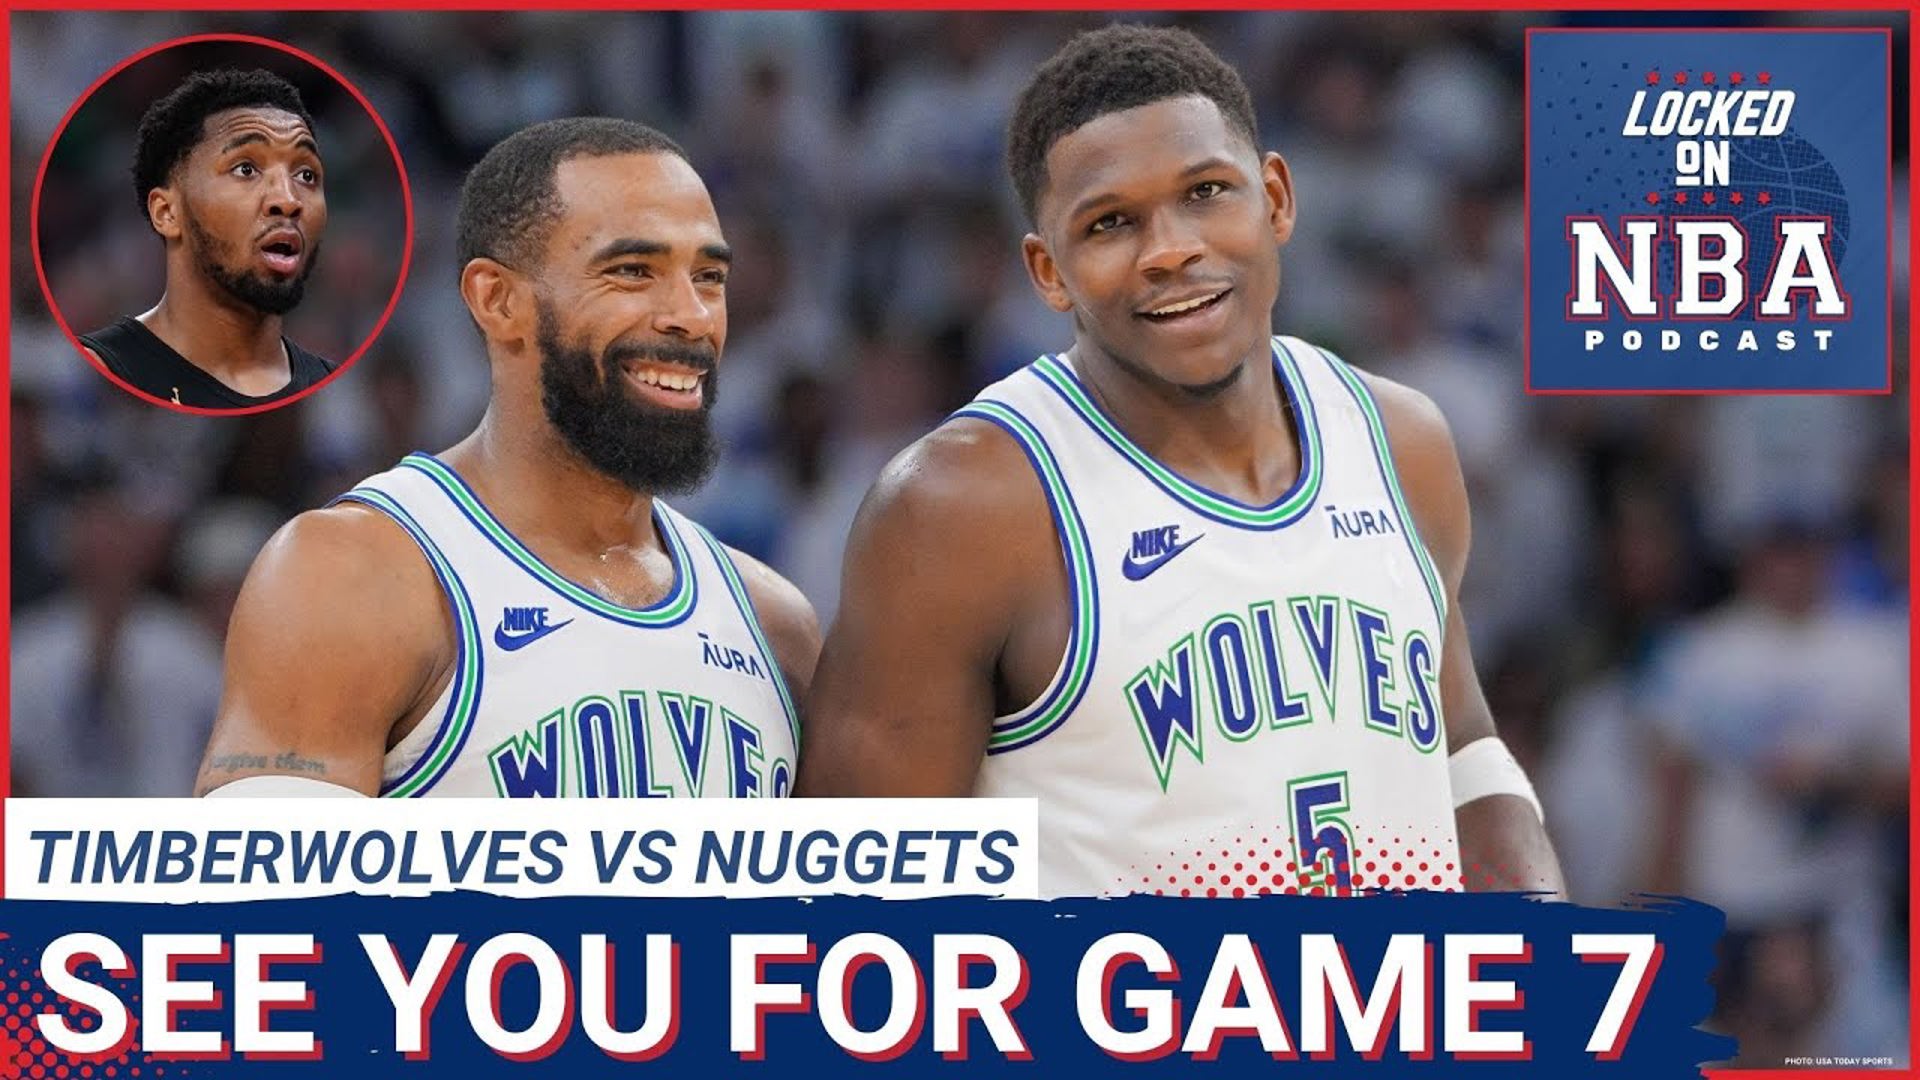 We have a Game 7 between the Nuggets and Timberwolves! Wes Goldberg and Adam Mares break down an impressive Game 6 Wolves win